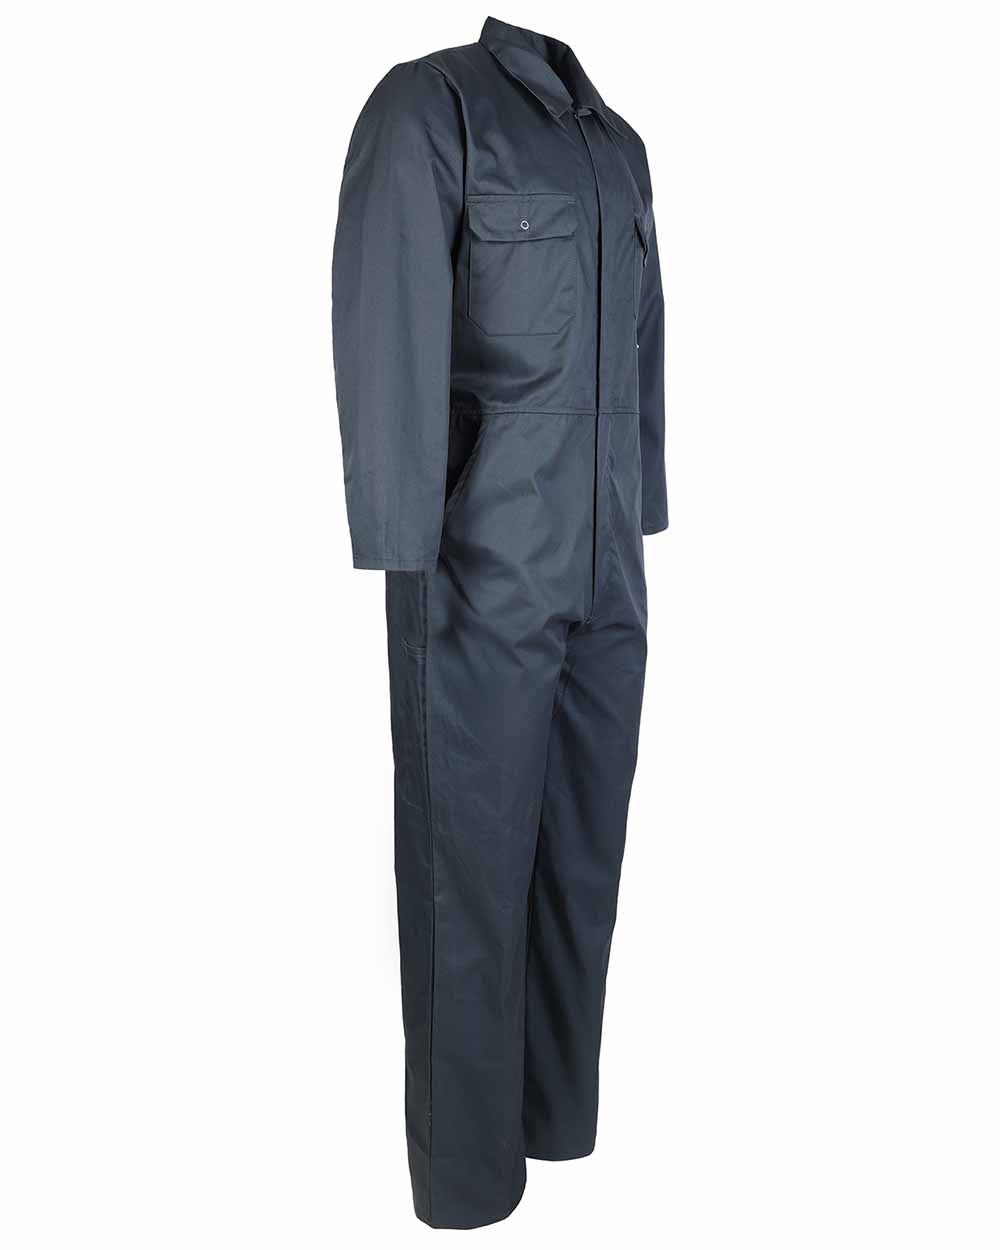 Showing chest pockets Fort Stud Front Boilersuit in Spruce 